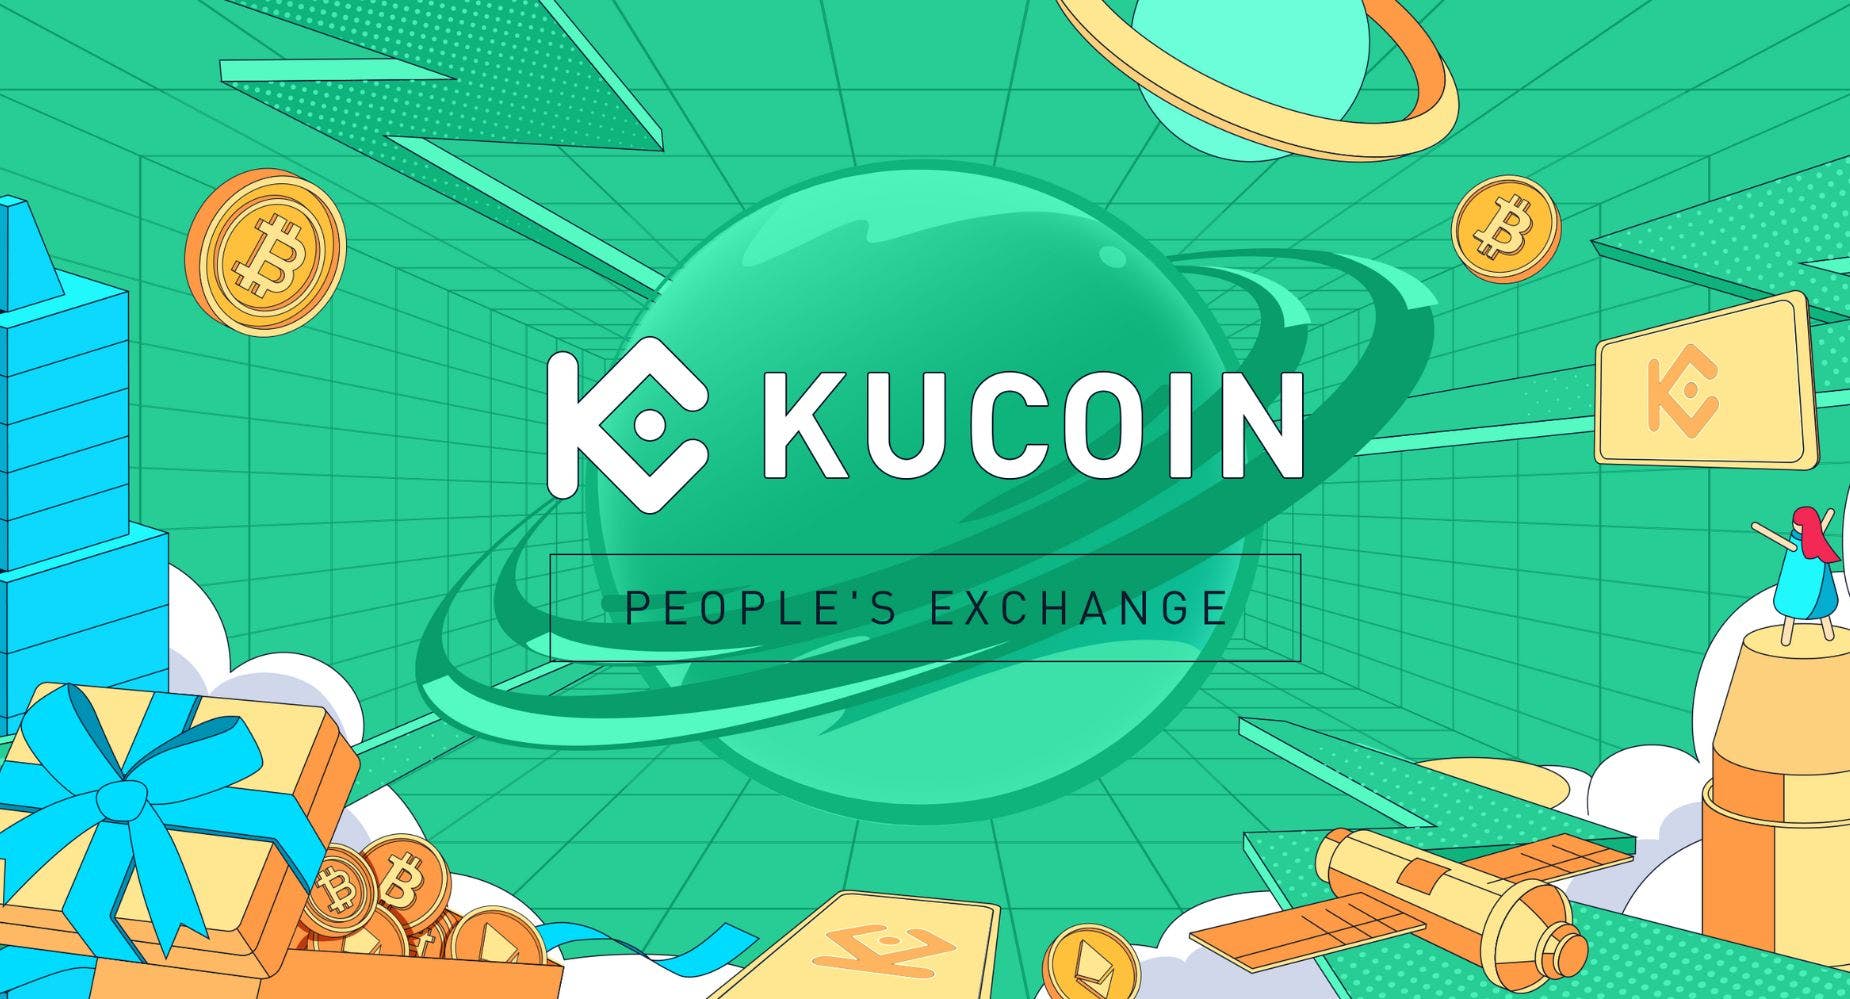 EXCLUSIVE: Proof Of Reserves 'The Only Solution Left' For Crypto Exchanges To Win Back User Confidence, Says KuCoin CEO